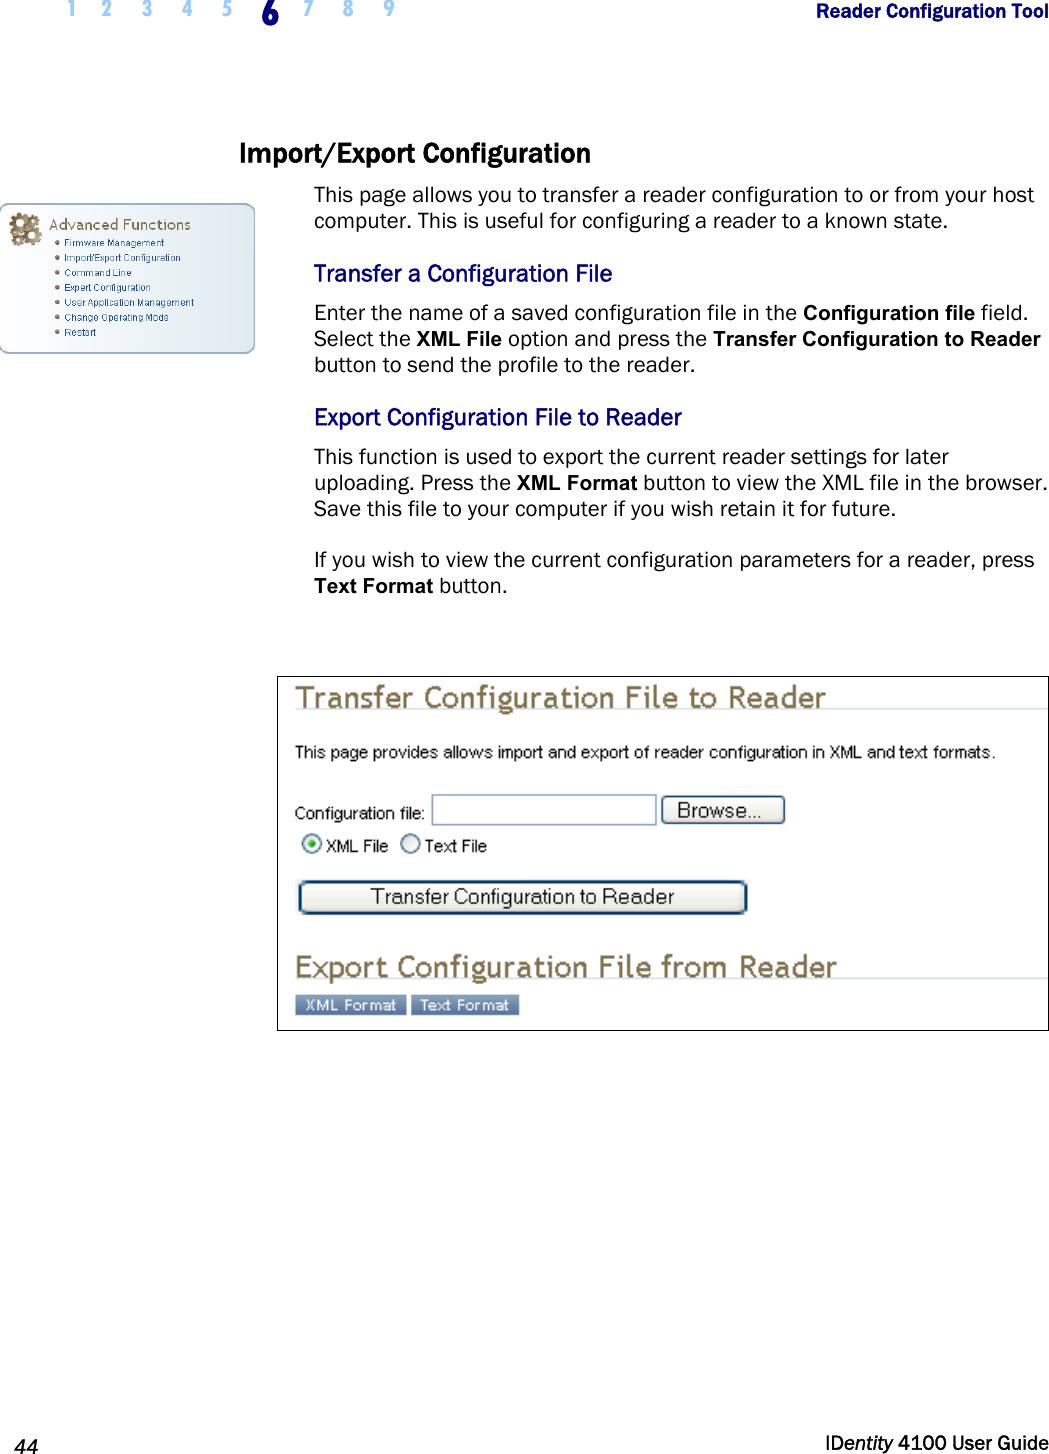  1 2  3  4  5 6 7 8 9       Reader Configuration Tool   44  IDentity 4100 User Guide  Import/Export Configuration  This page allows you to transfer a reader configuration to or from your host computer. This is useful for configuring a reader to a known state.  Transfer a Configuration File Enter the name of a saved configuration file in the Configuration file field. Select the XML File option and press the Transfer Configuration to Reader button to send the profile to the reader.  Export Configuration File to Reader This function is used to export the current reader settings for later uploading. Press the XML Format button to view the XML file in the browser. Save this file to your computer if you wish retain it for future. If you wish to view the current configuration parameters for a reader, press Text Format button.     